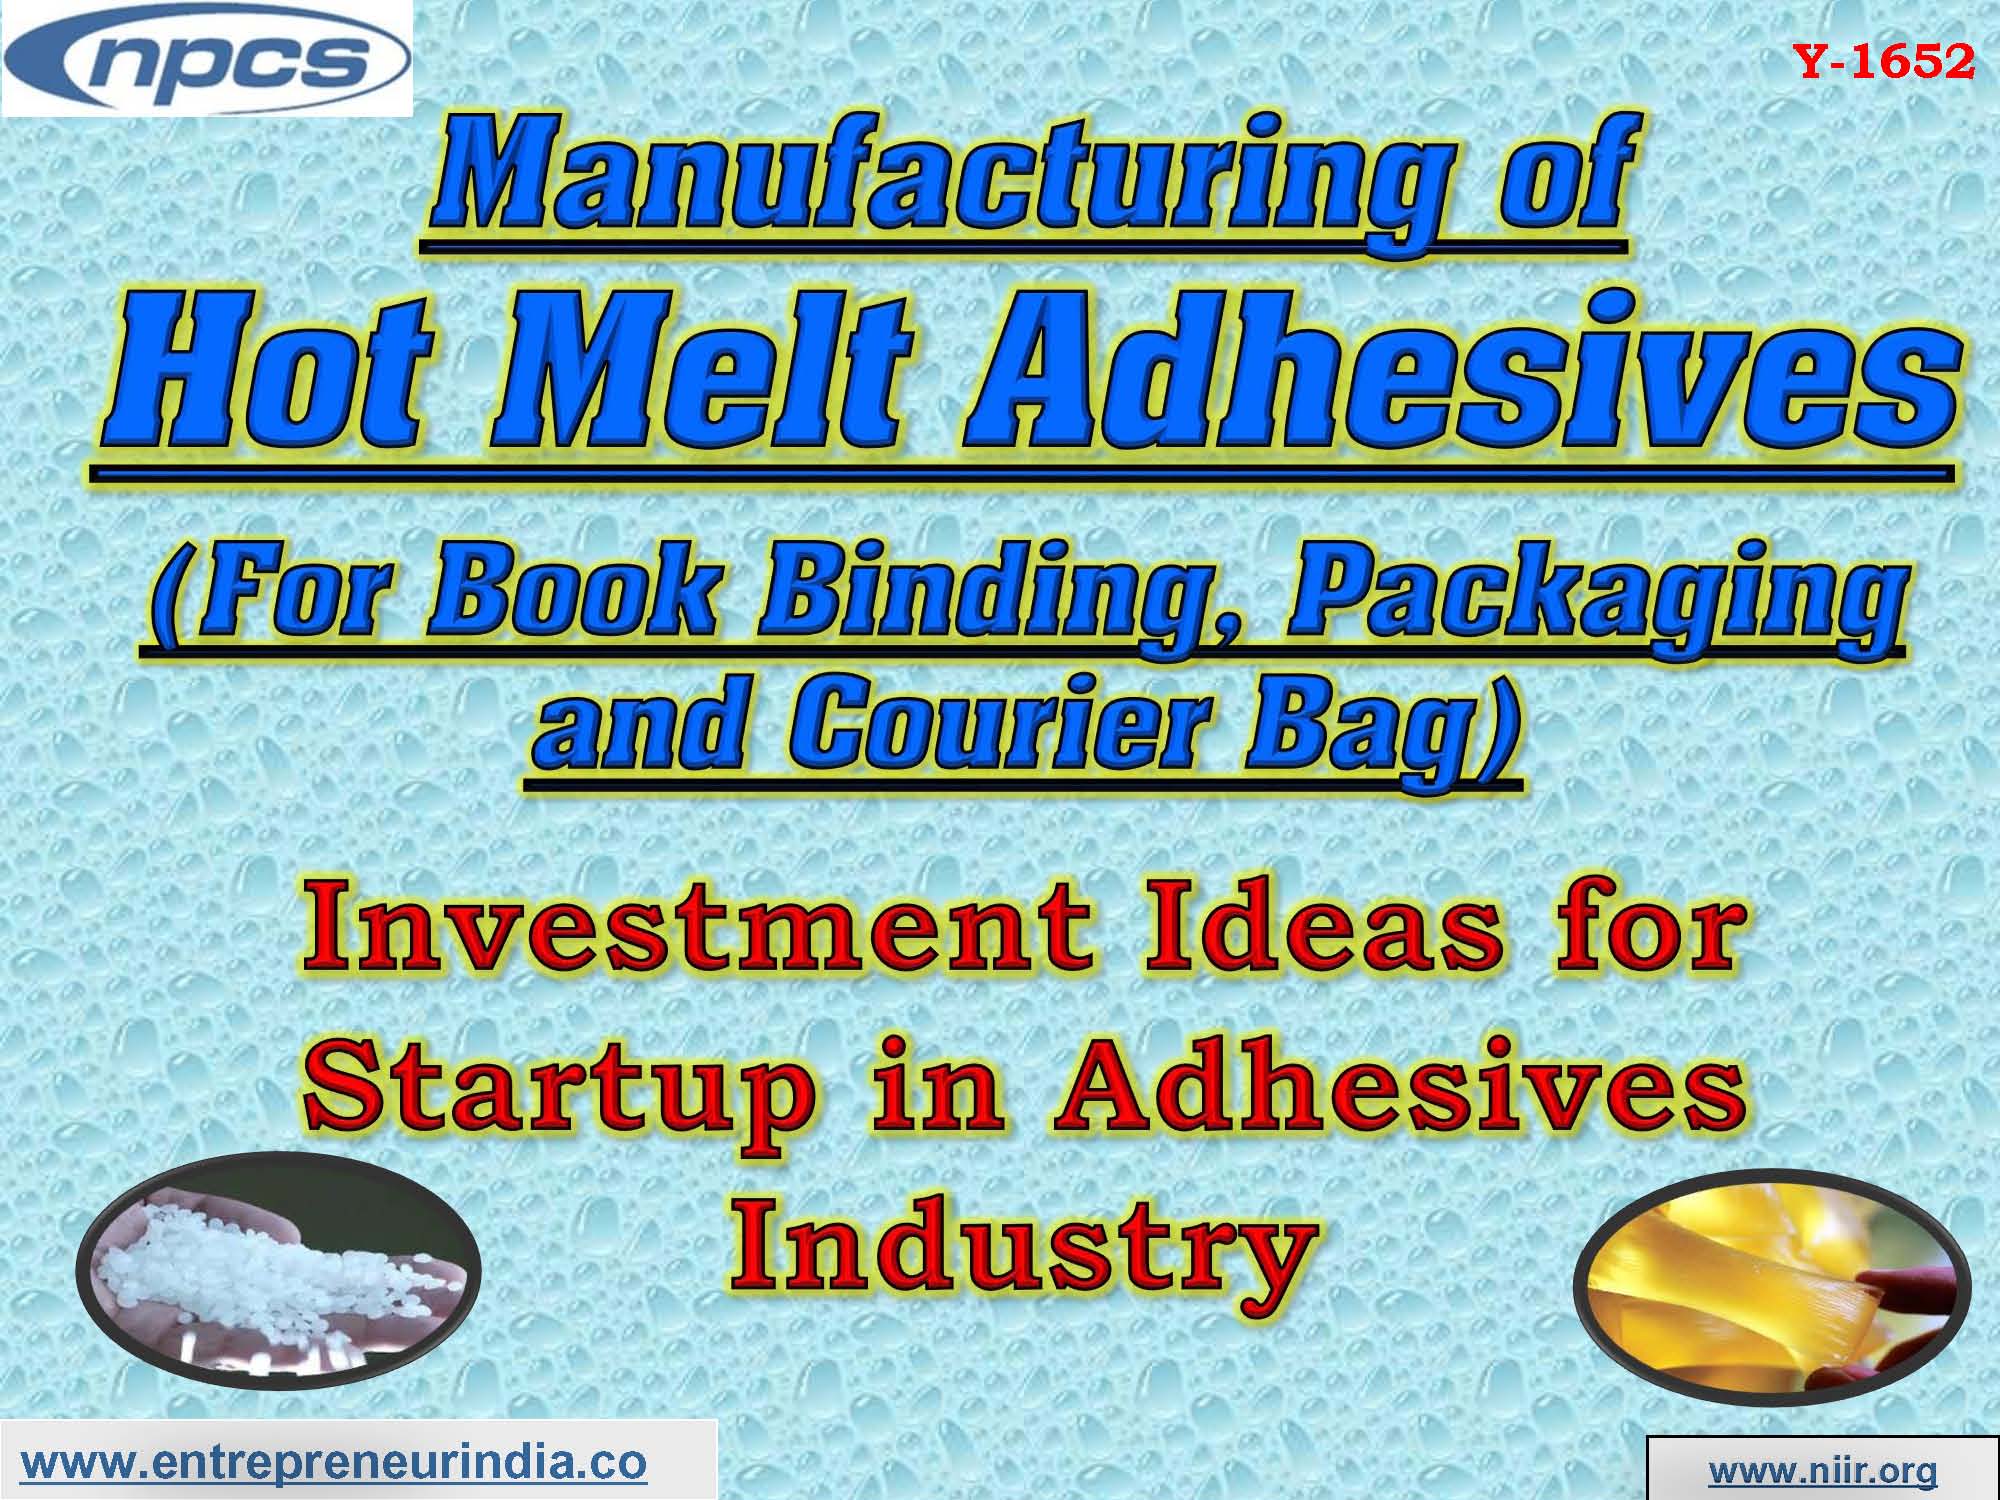 Manufacturing of Hot Melt Adhesives For Book Binding, Packaging and Courier Bag